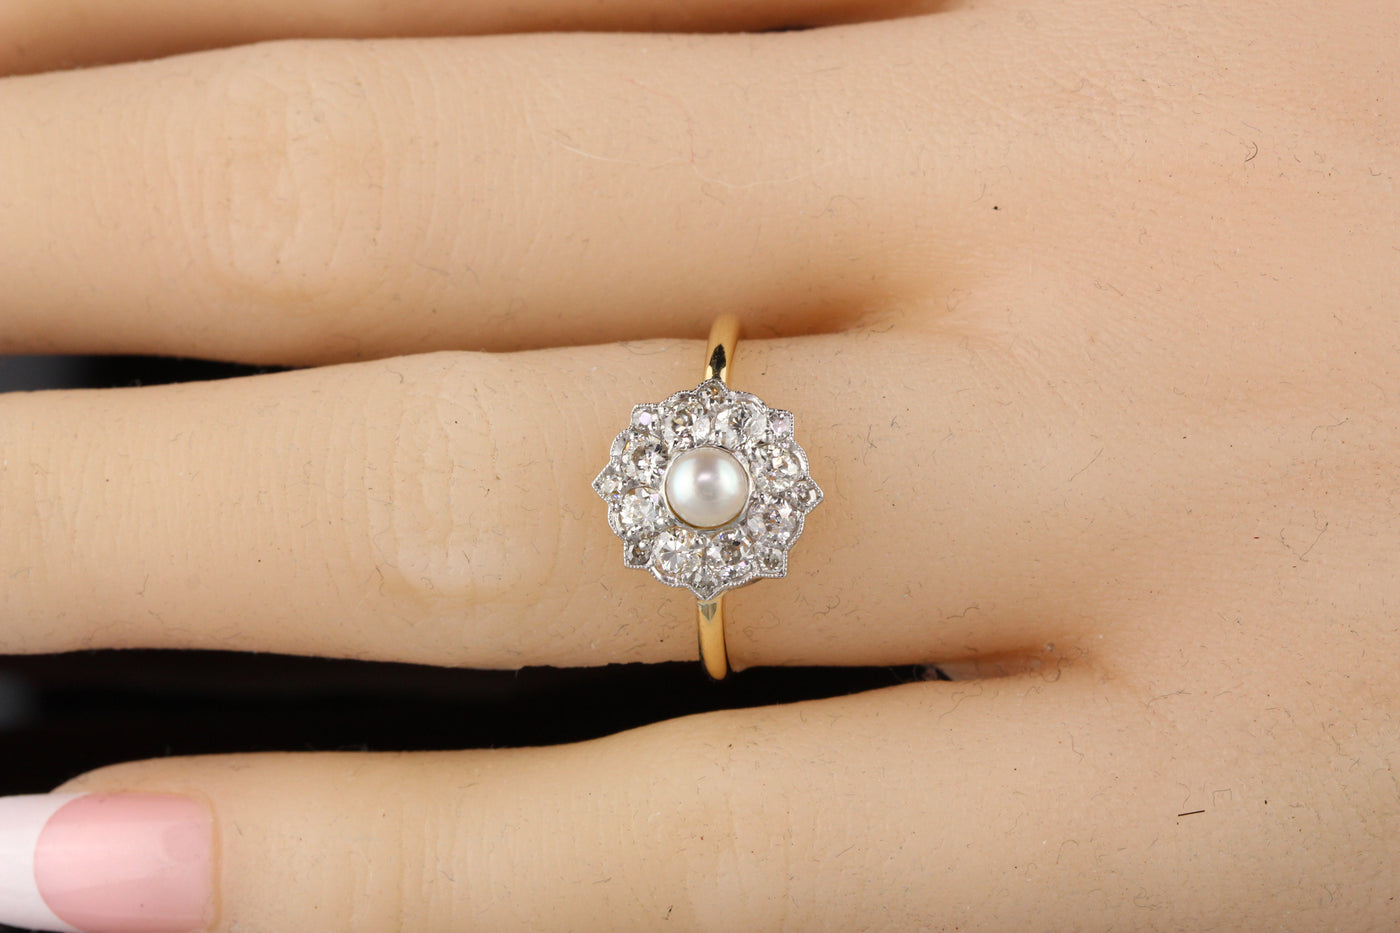 Antique Victorian 18K Yellow Gold Old Euro Cut Diamond and Pearl Engagement Ring